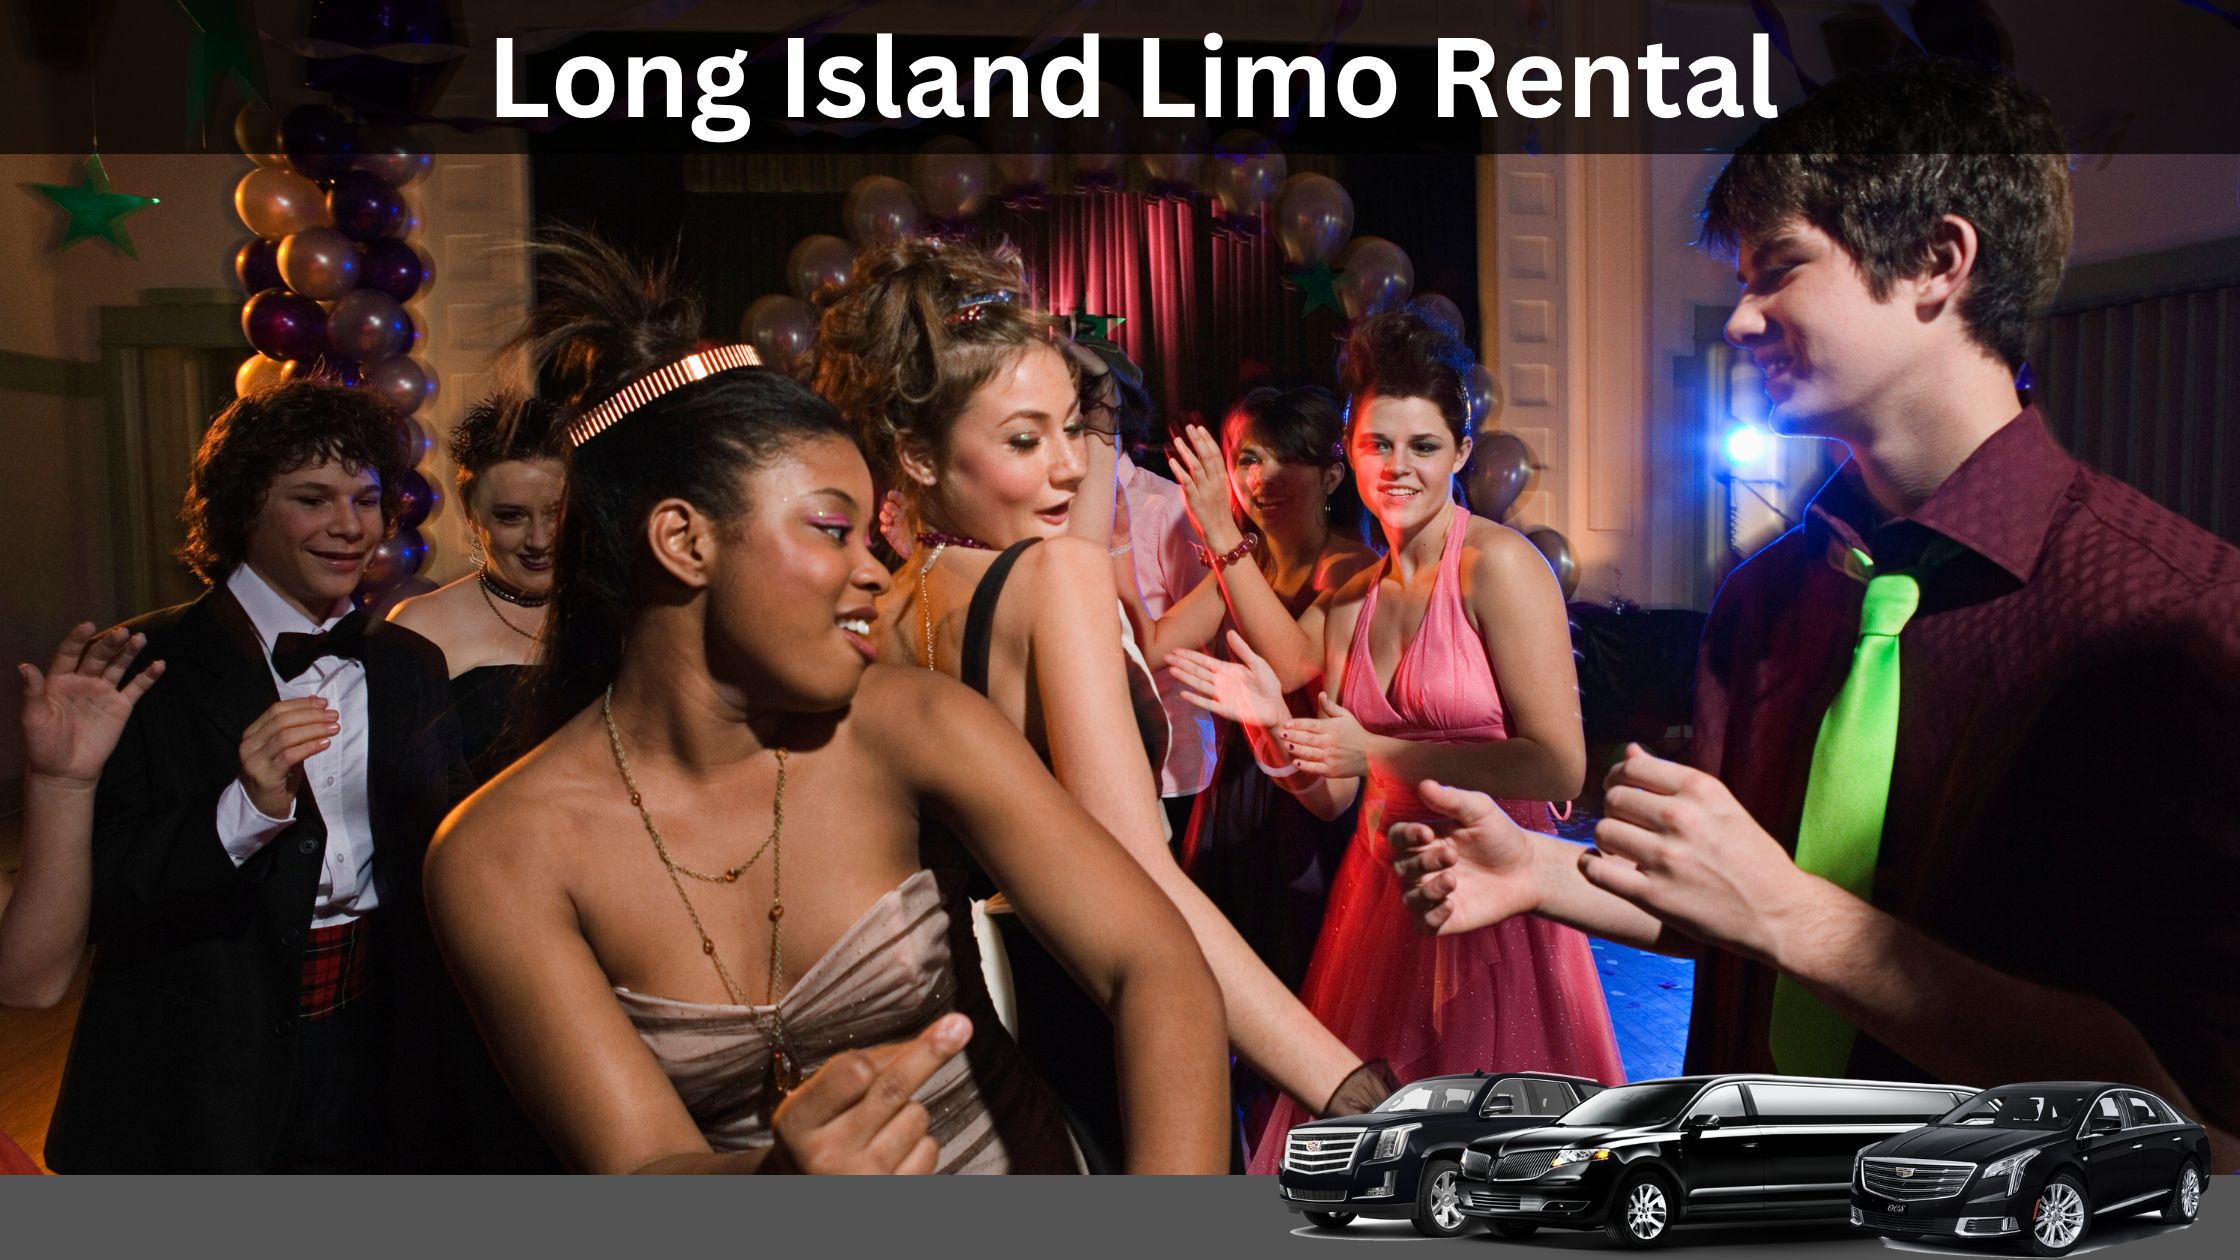 Renting a Limo for Prom in NYC: Costs, Tips, and Top Schools | Long Island Limo Rental